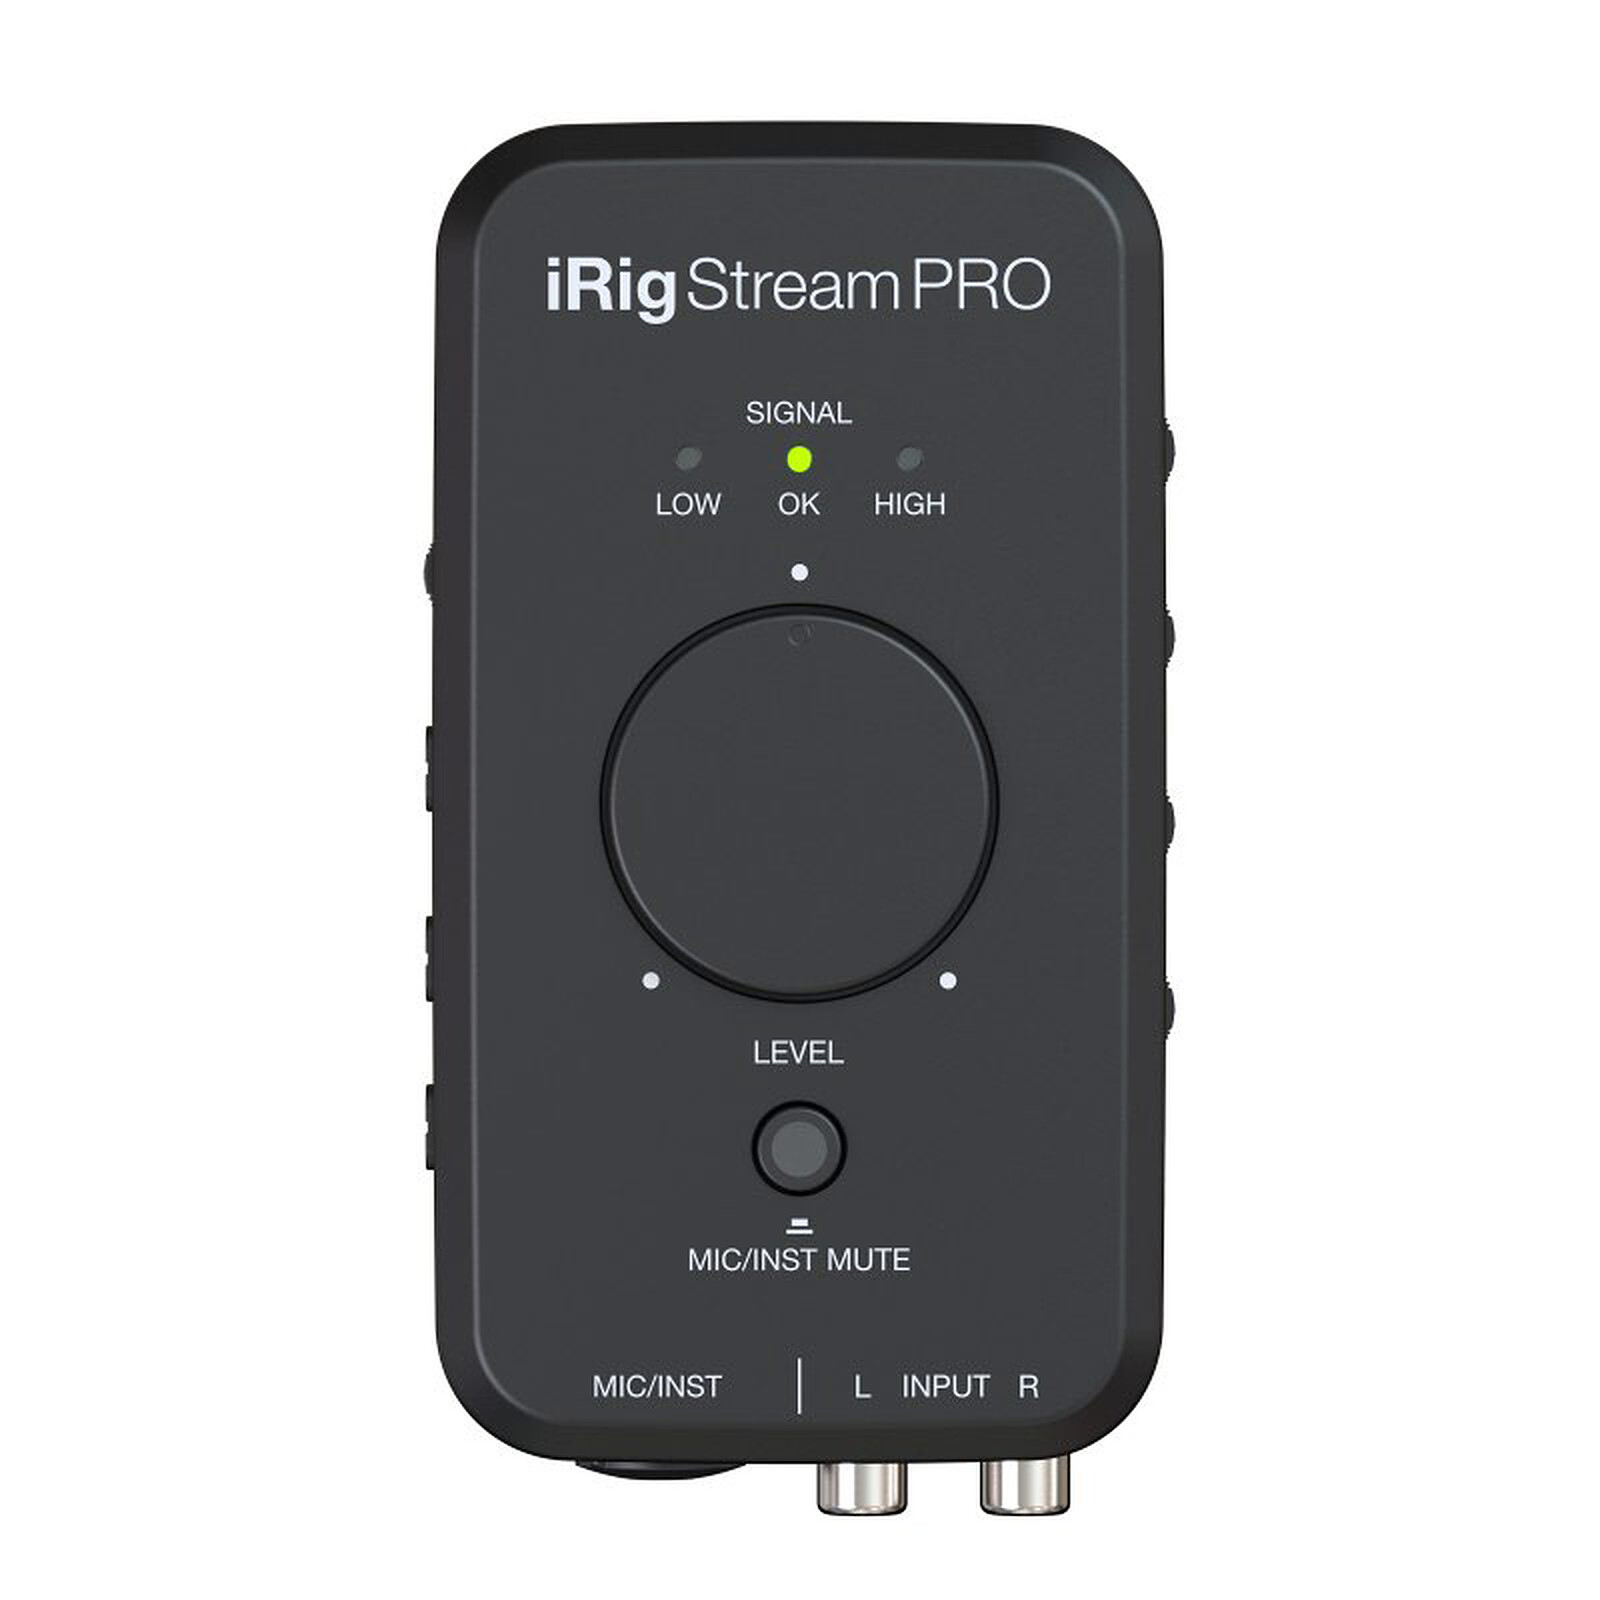 Can The iRig Stream Pro Do The Job Of Pro Hardware?